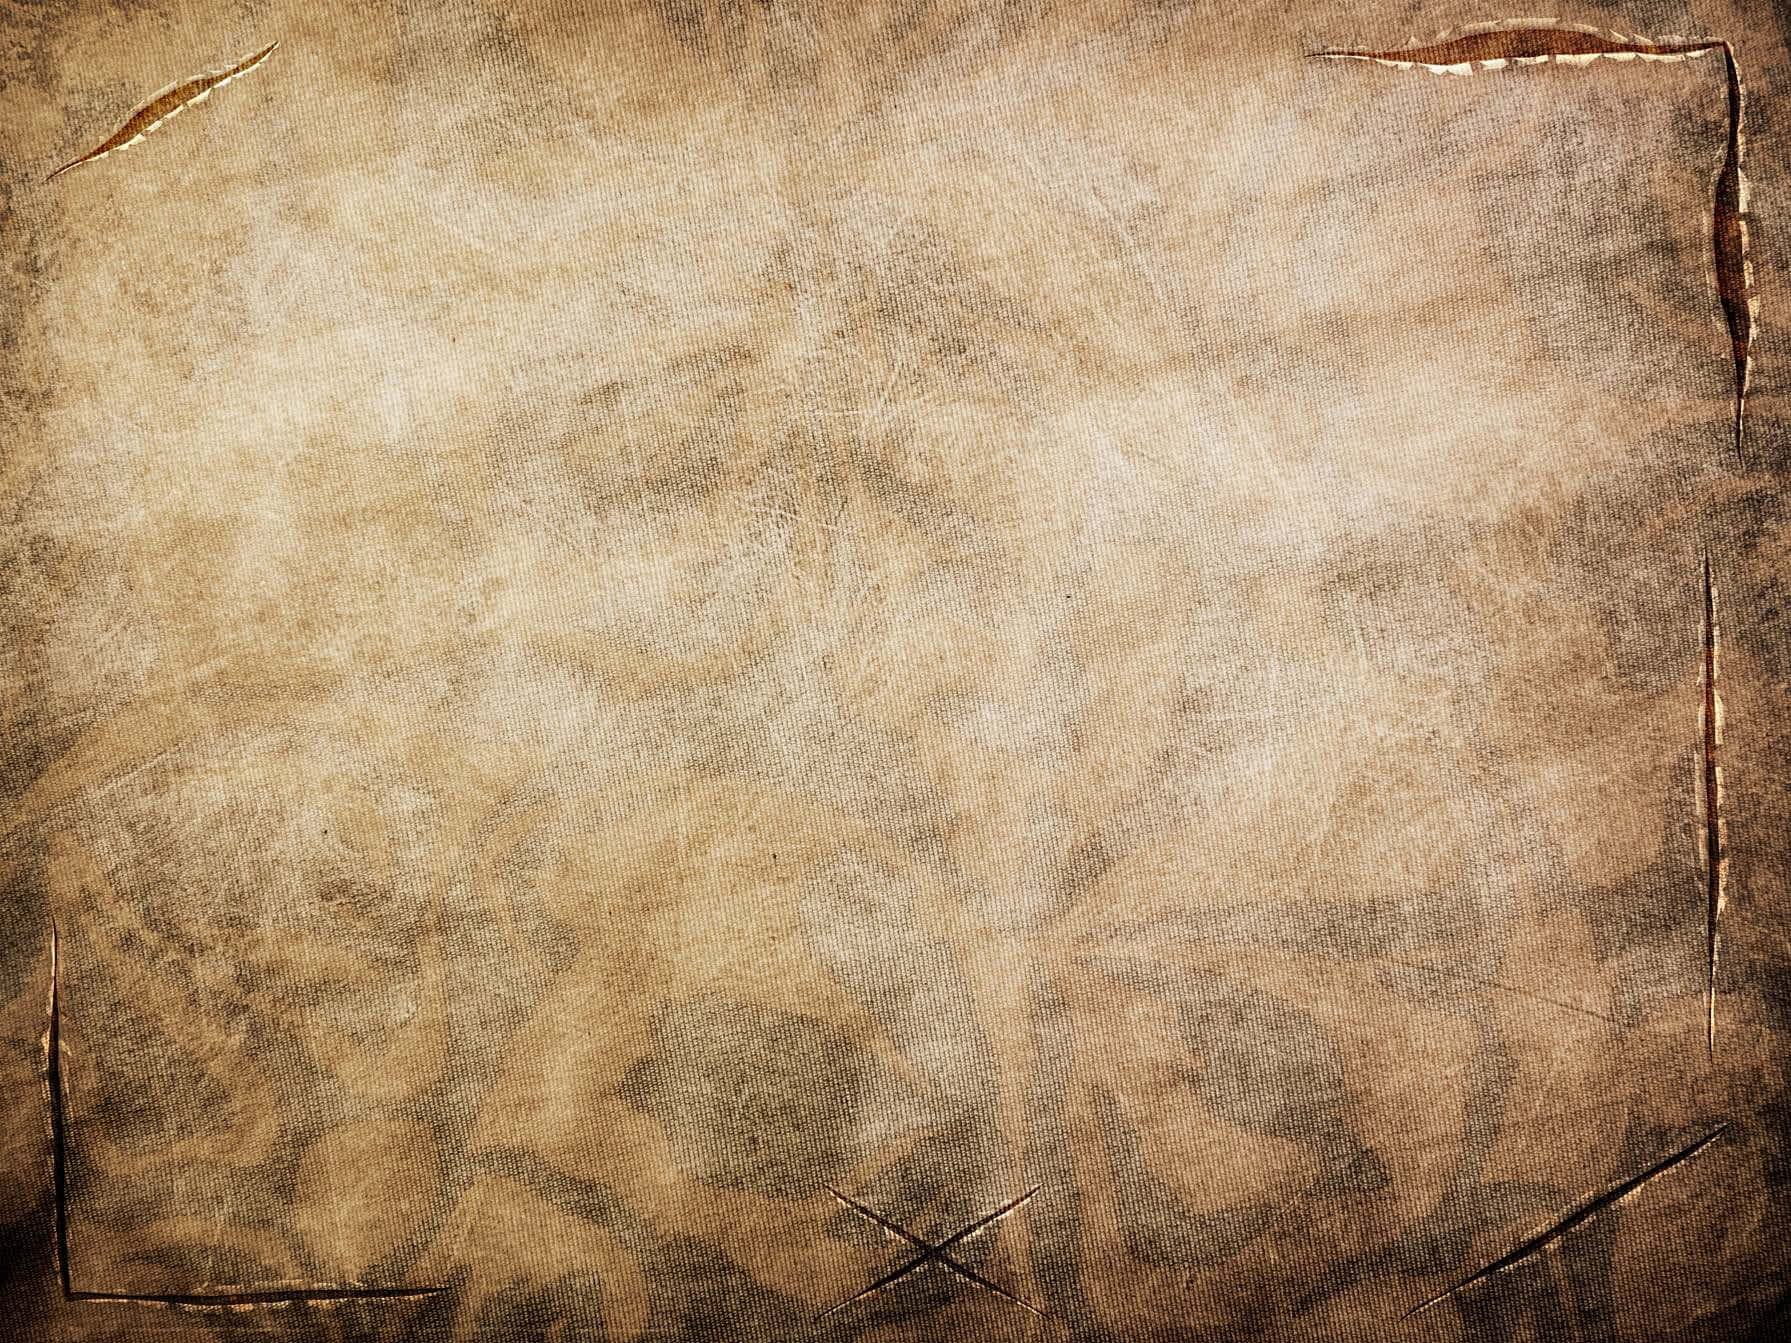 Antique paper texture with a vintage look